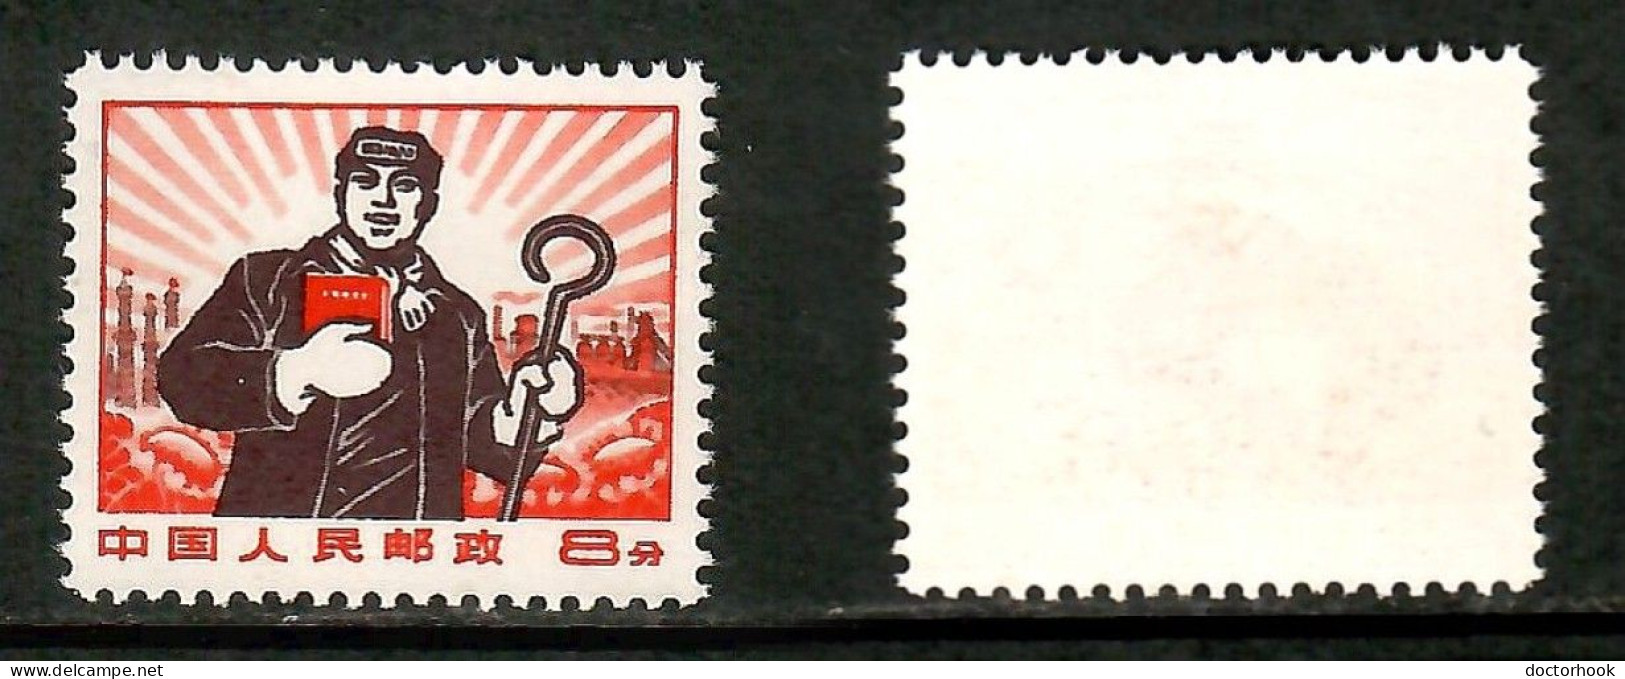 PEOPLES REPUBLIC Of CHINA   Scott # 1017a* MINT NO GUM AS ISSUED (CONDITION AS PER SCAN) (Stamp Scan # 1012-2) - Ongebruikt